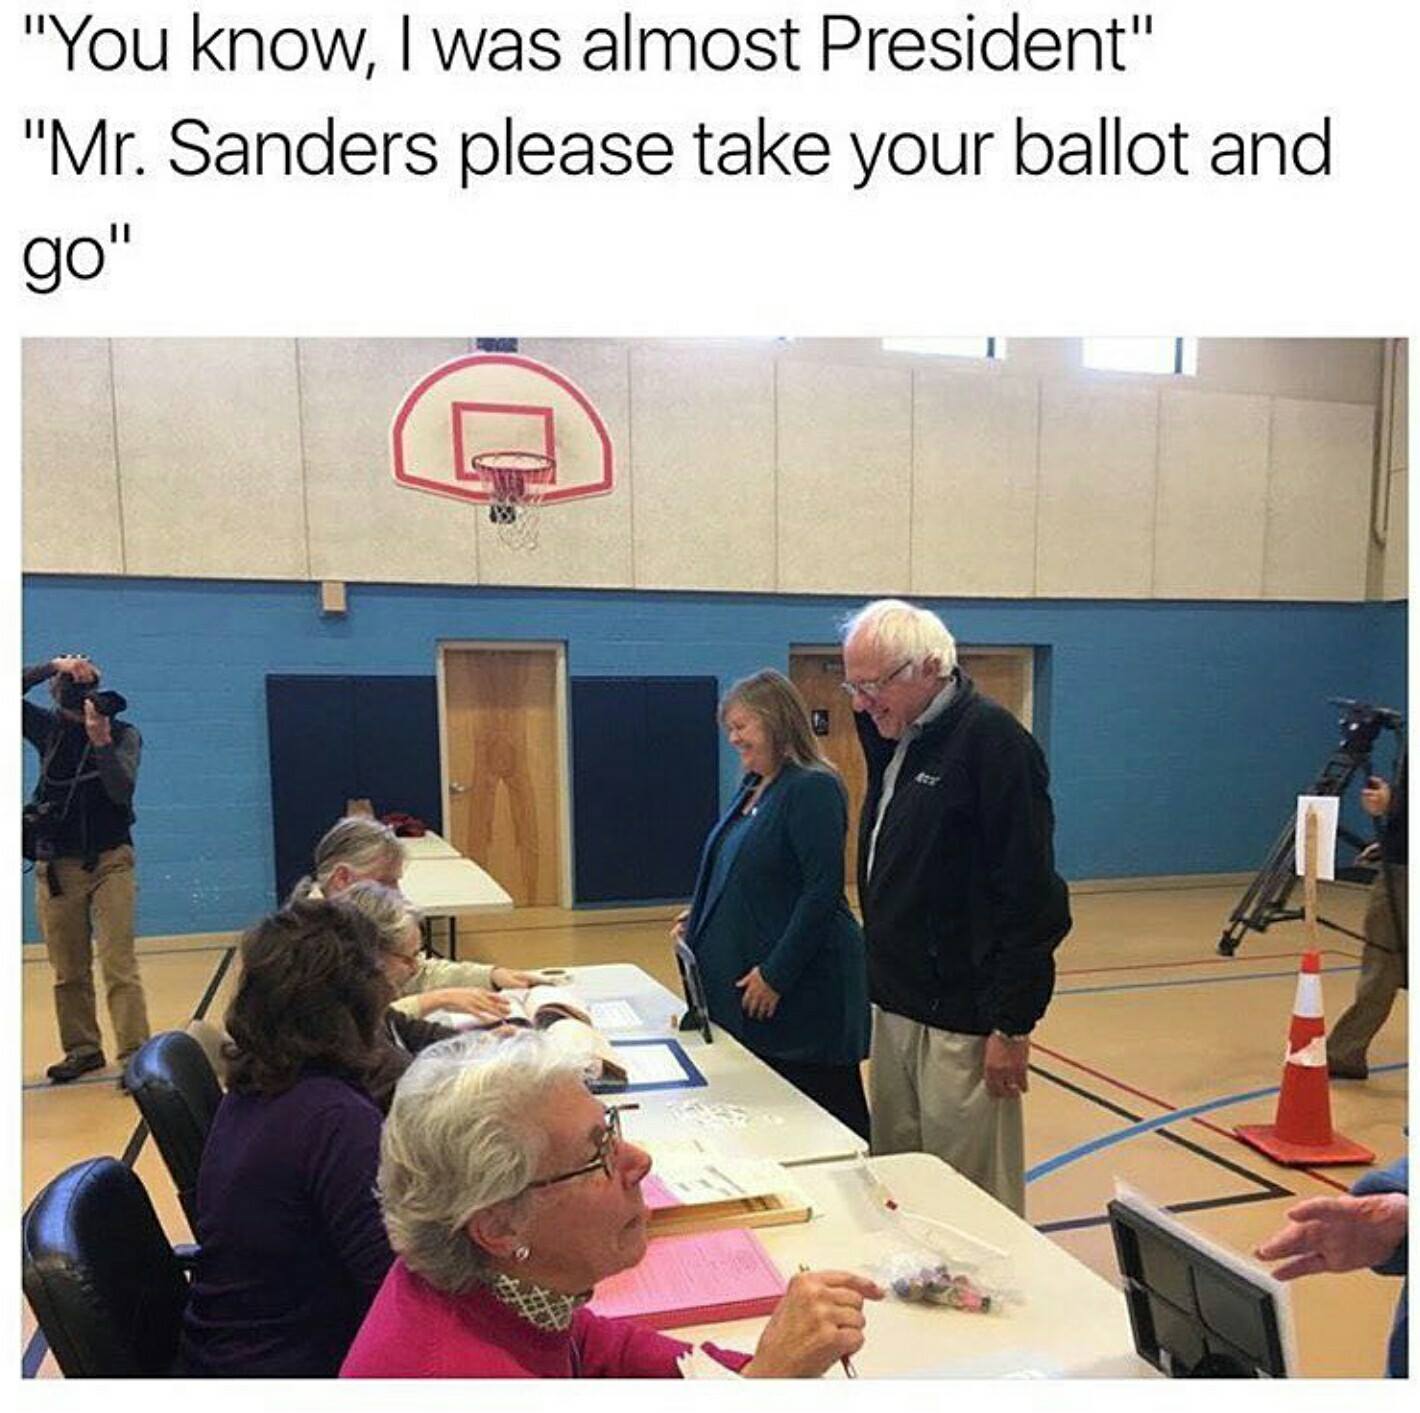 Bernie Sanders - "You know, I was almost President" "Mr. Sanders please take your ballot and go"